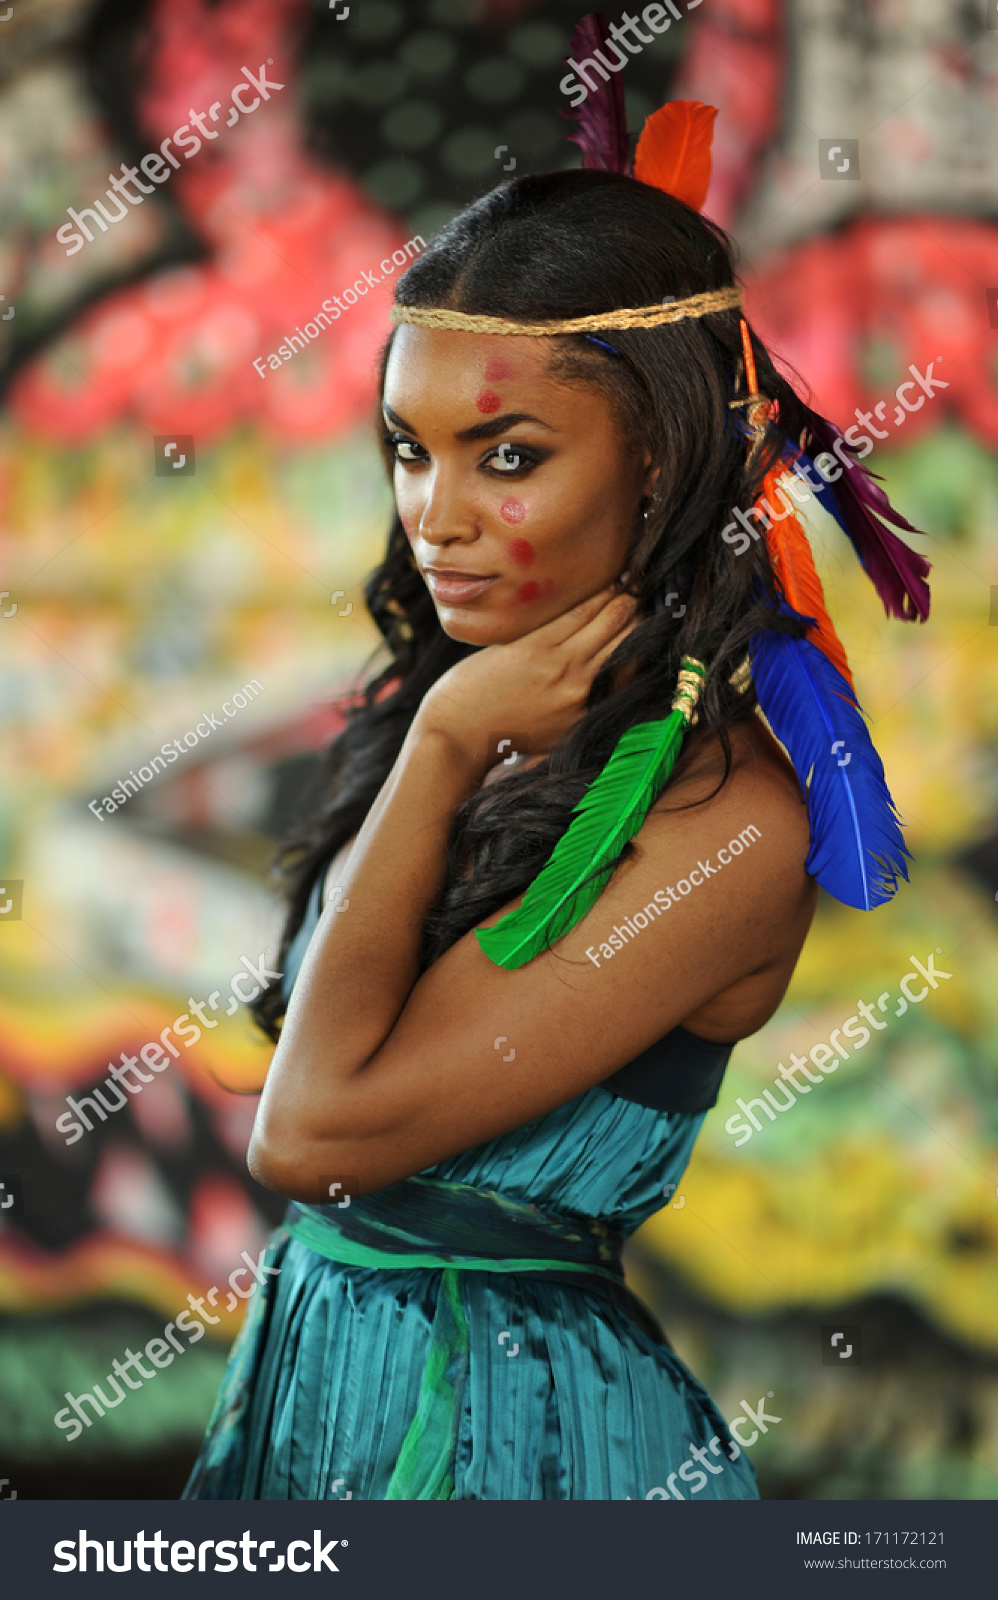 Portrait Of Young Beautiful Indian Cherokee Woman With Feathers In Her